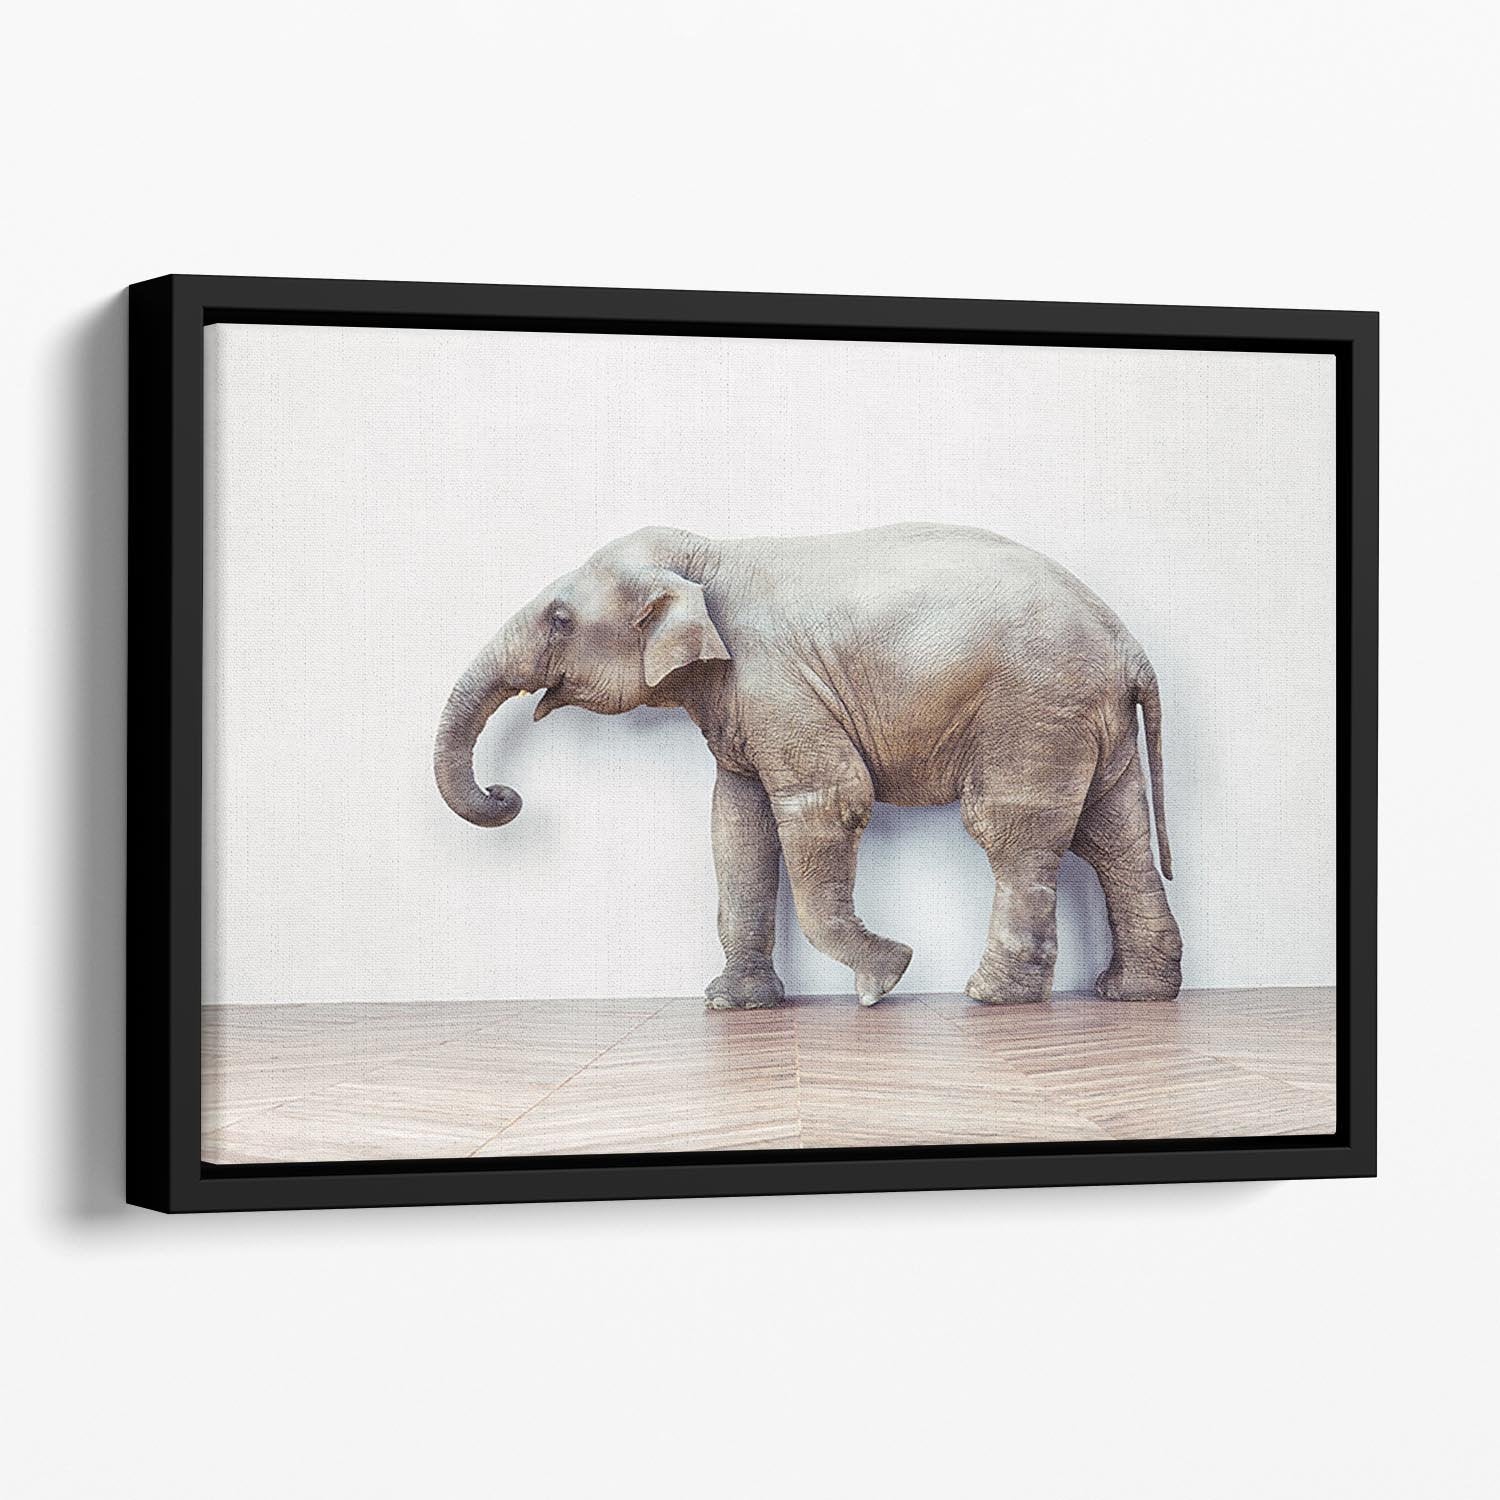 The elephant calm in the room near white wall Floating Framed Canvas - Canvas Art Rocks - 1